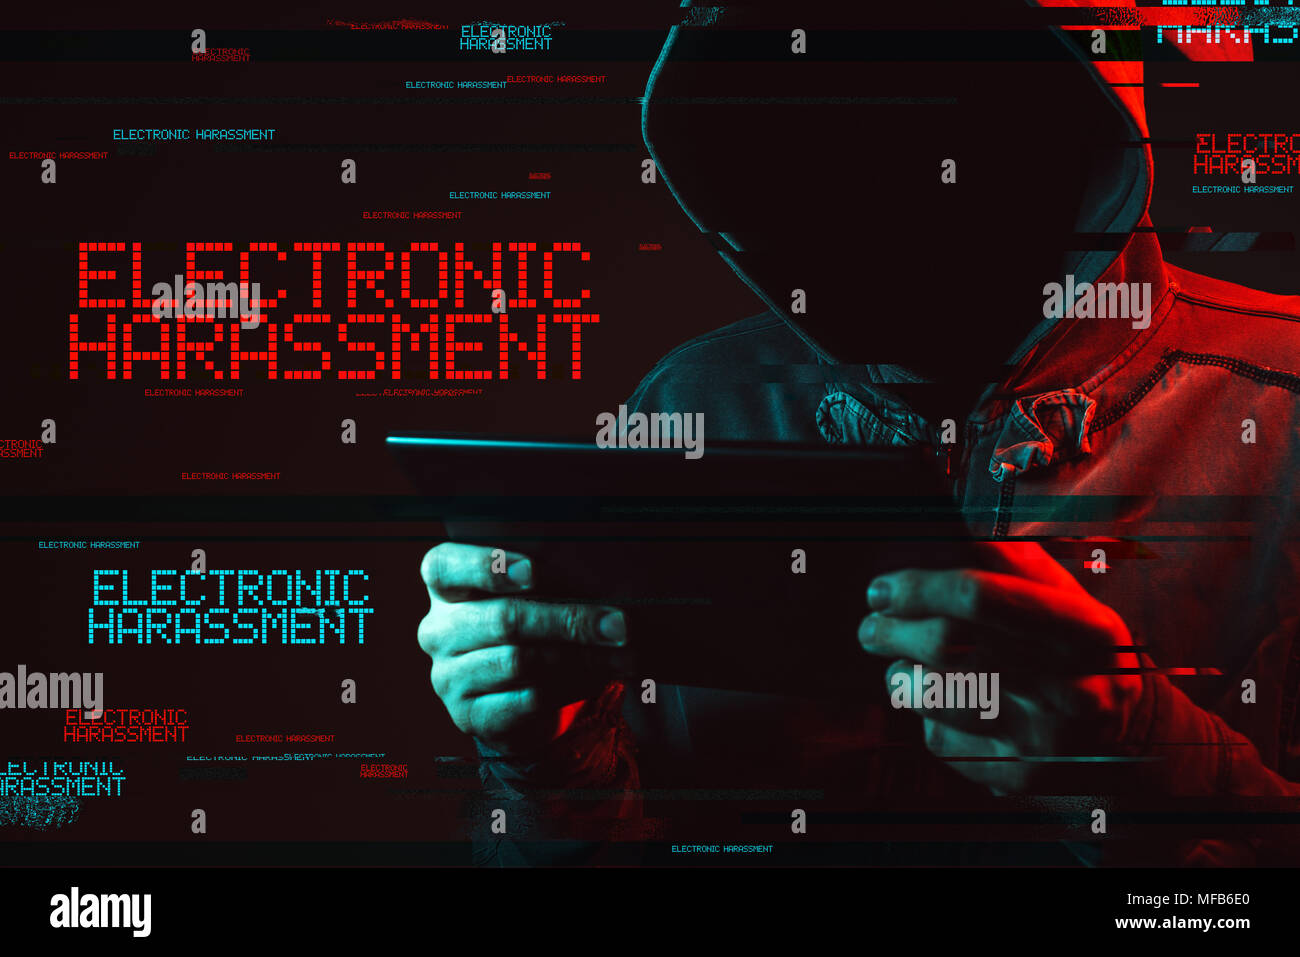 Electronic harassment concept with faceless hooded male person using tablet computer, low key red and blue lit image and digital glitch effect Stock Photo